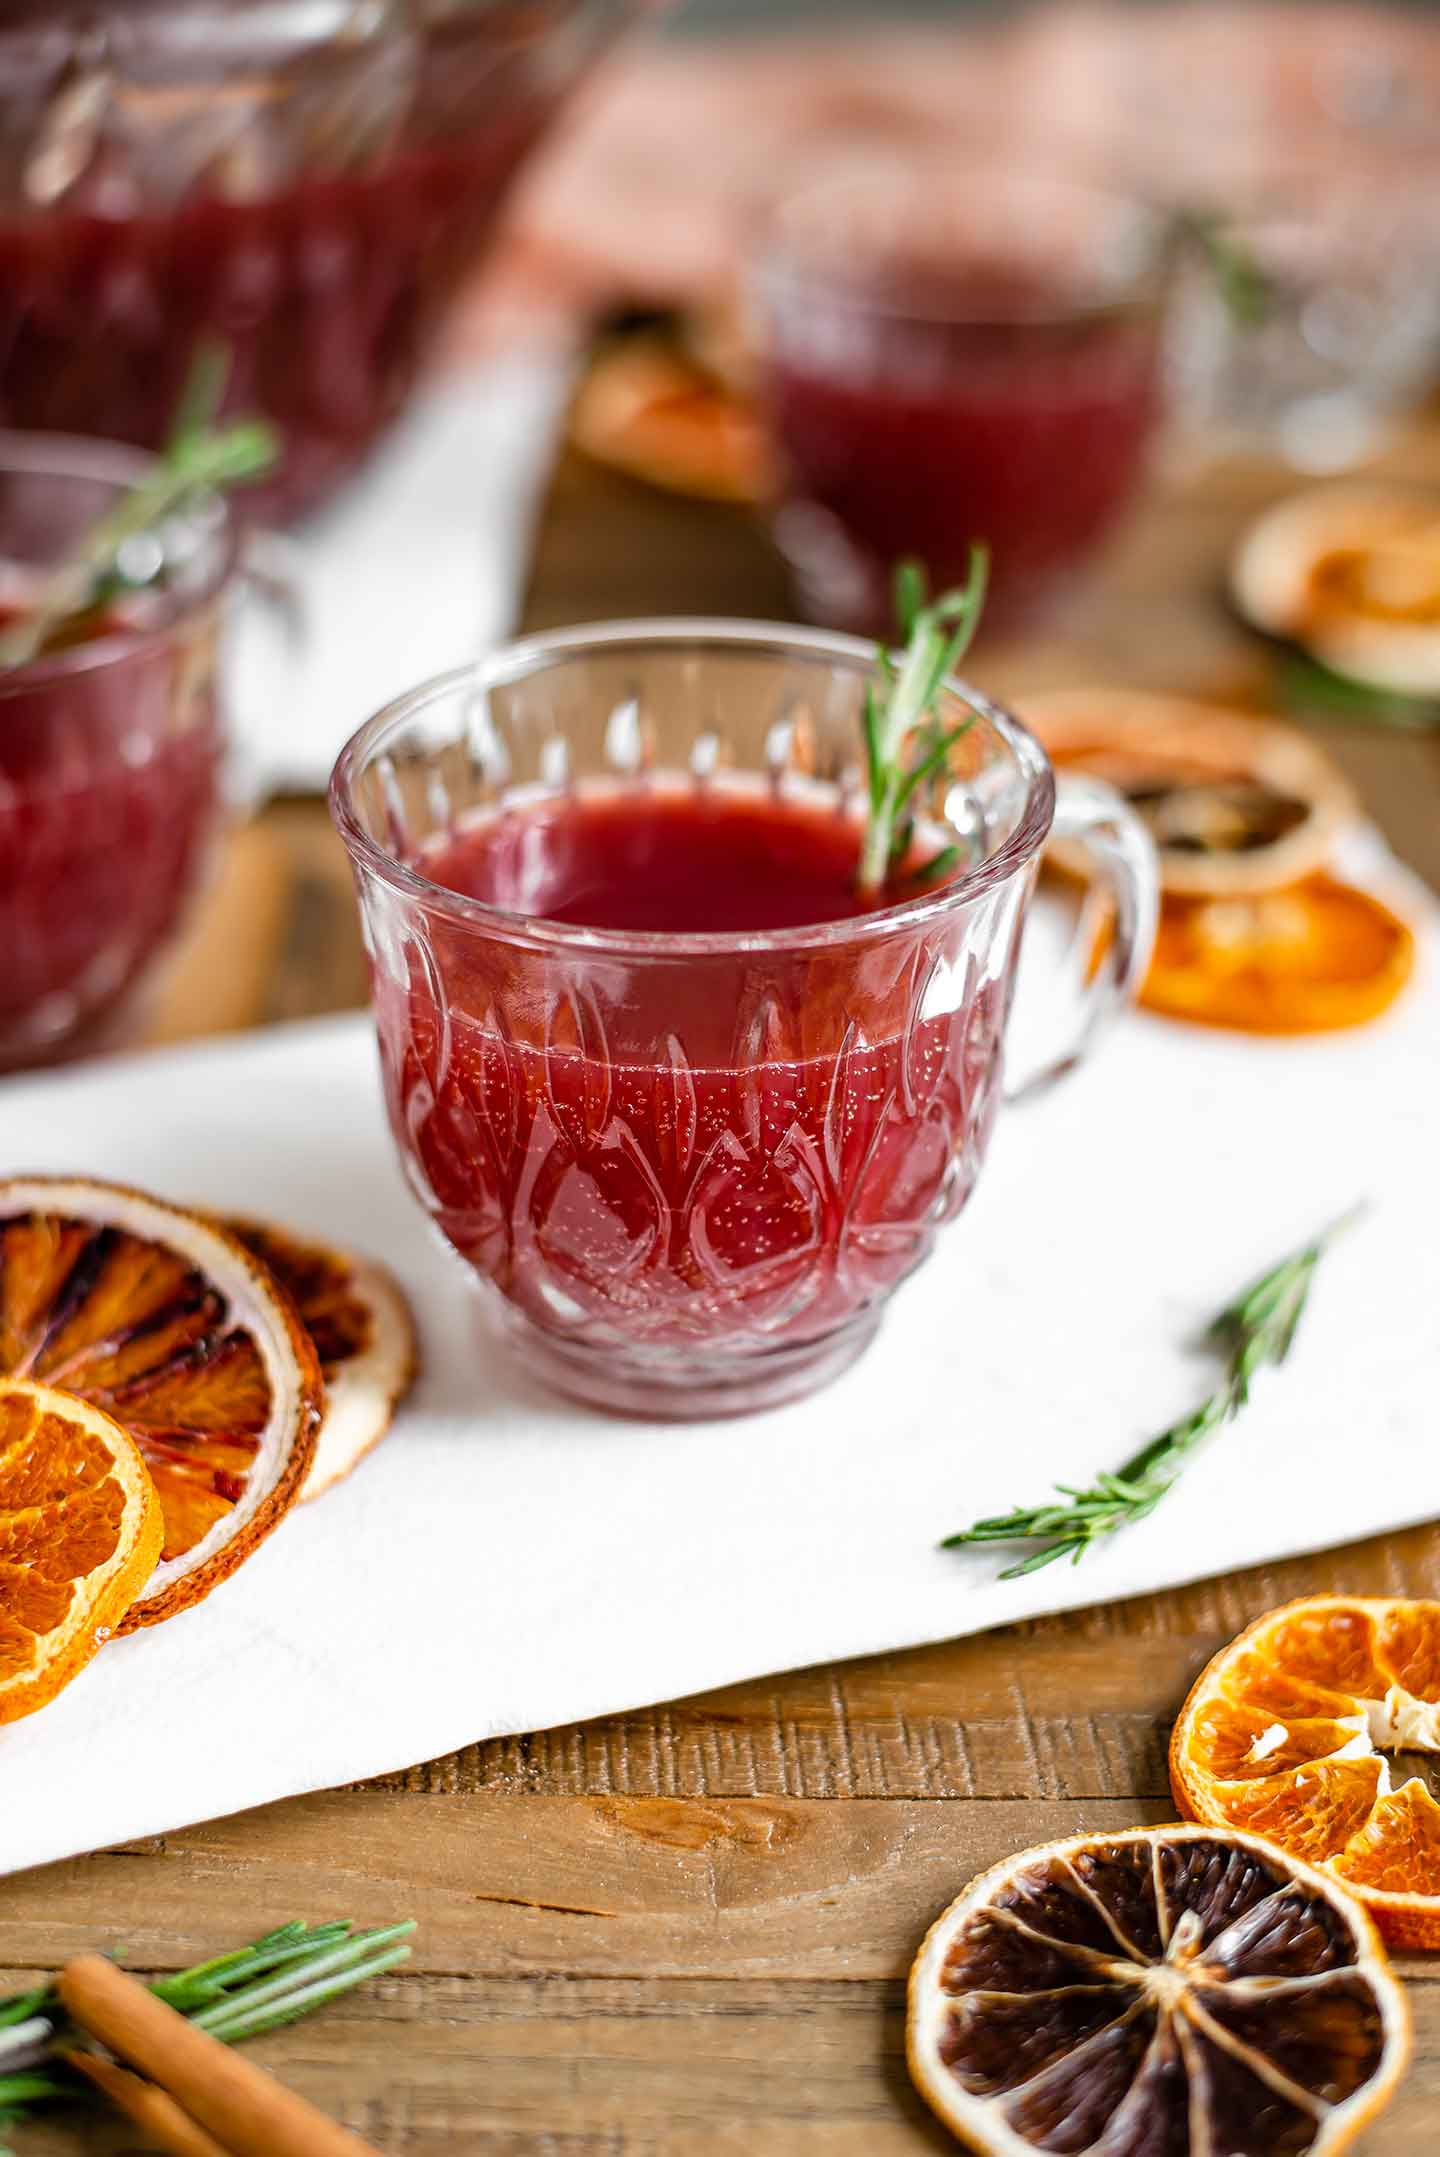 Side view of a small punch glass on a white tray filled with a deep red bubbly rum punch. A sprig of rosemary garnishes the glass and dried citrus fruit is scattered on the tray.